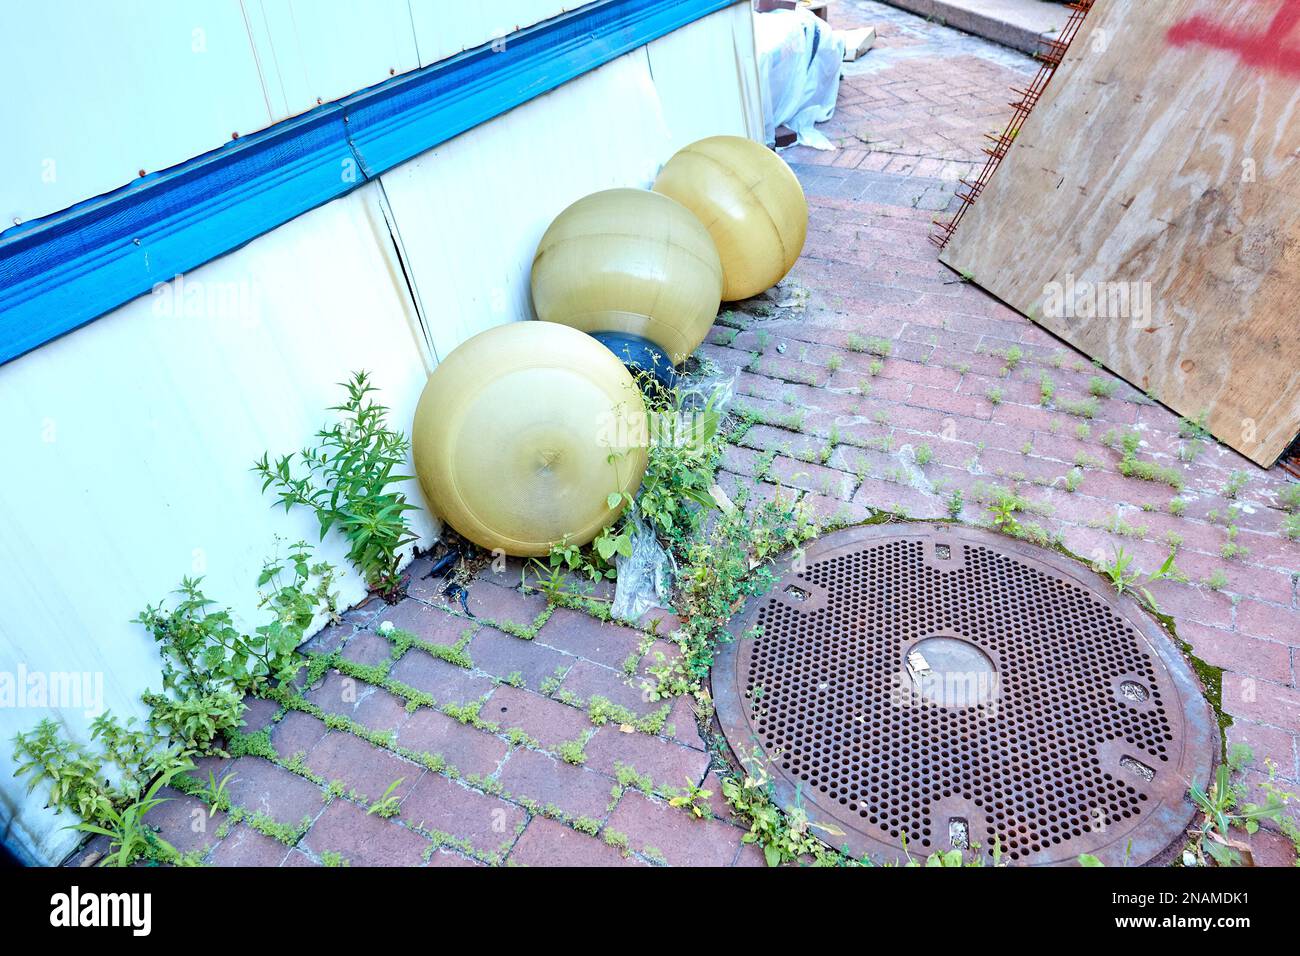 Streetlight Globes on Brick Sidewalk with Manhole Cover and Weeds Stock Photo